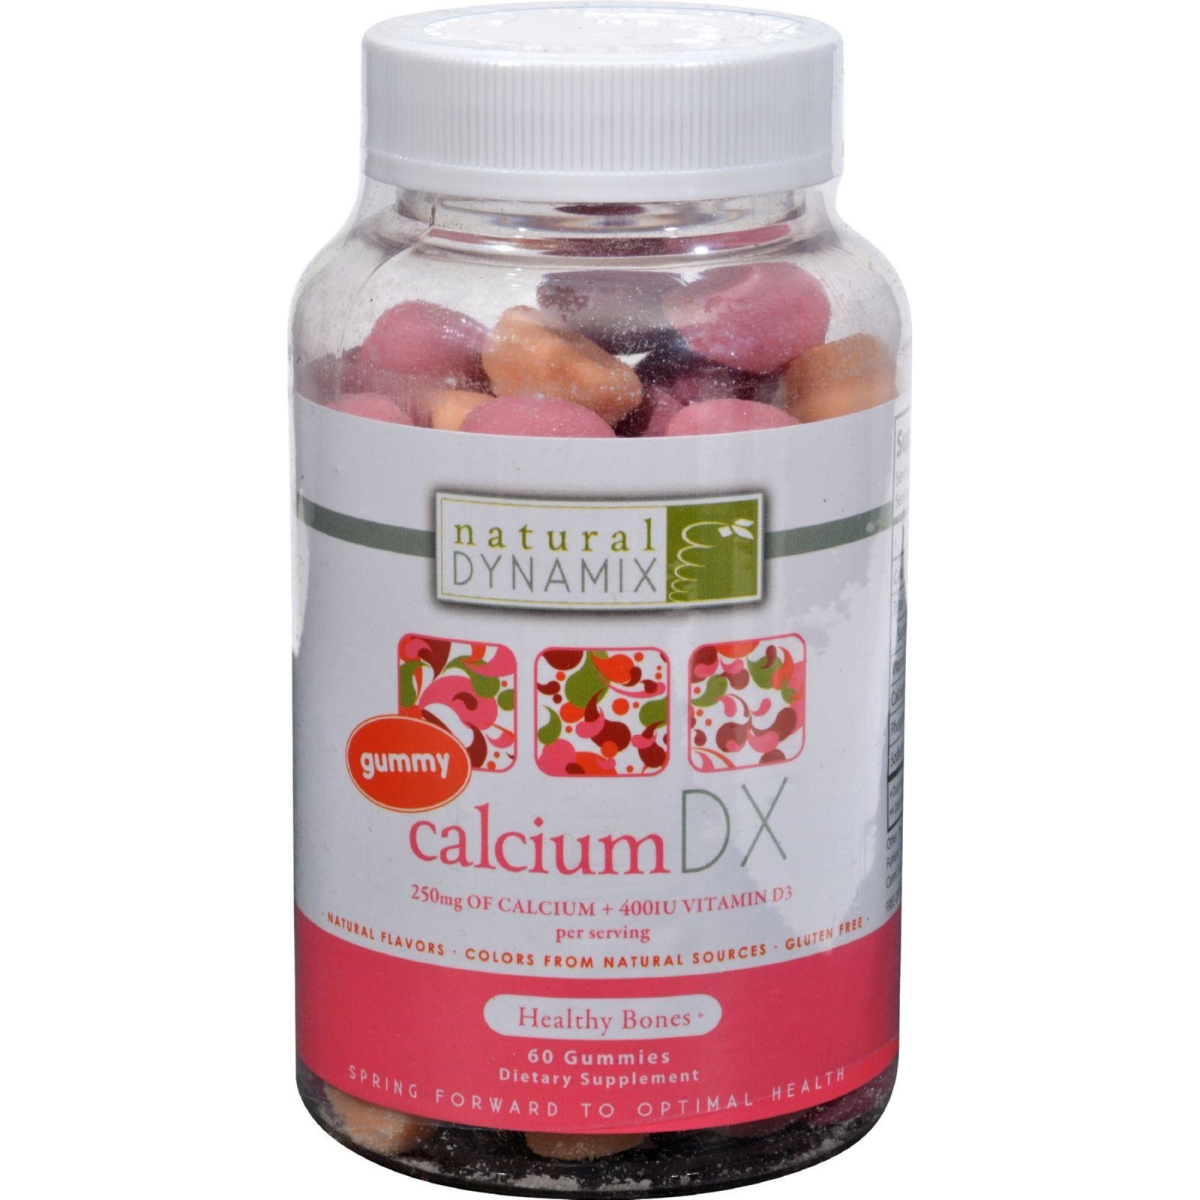 Hg0162784 Calcium Dx For Adults - 60 Gummies